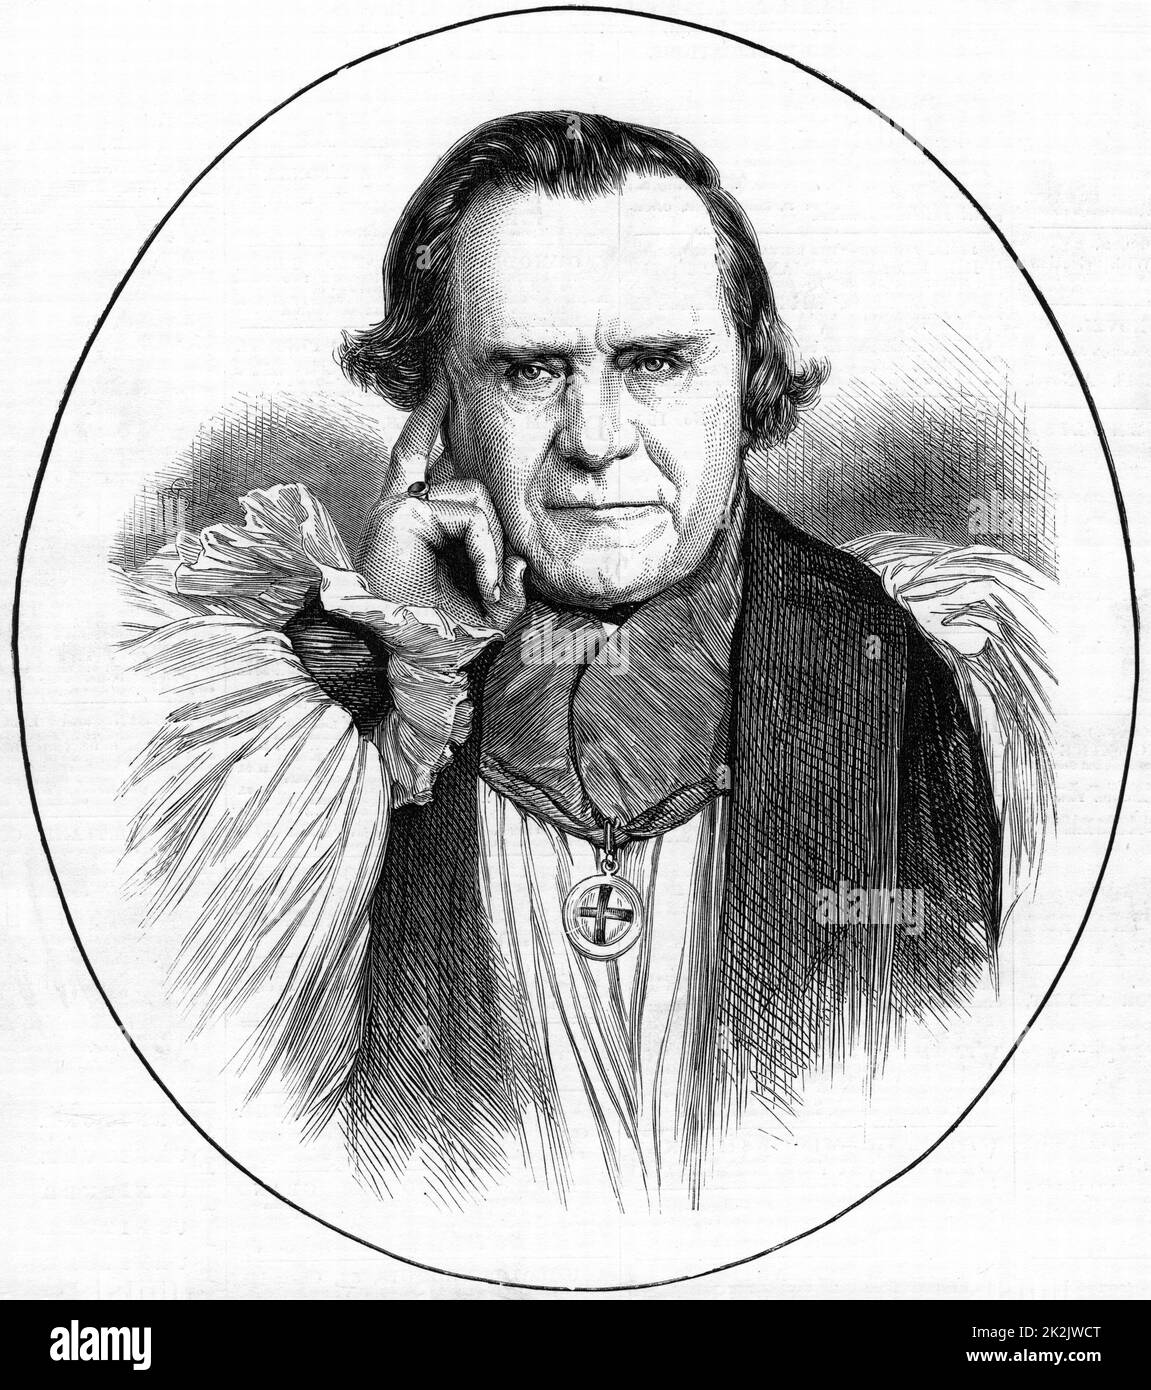 Samuel Wilberforce (1805-1873) English prelate, third son of abolitionist William Wilberforce. Bishop of Oxford 1845, Bishop of Winchester 1869. Known as 'Soapy Sam' for his charm. Opposed Darwinism. From 'The Illustrated London News', 26 July 1873 Stock Photo